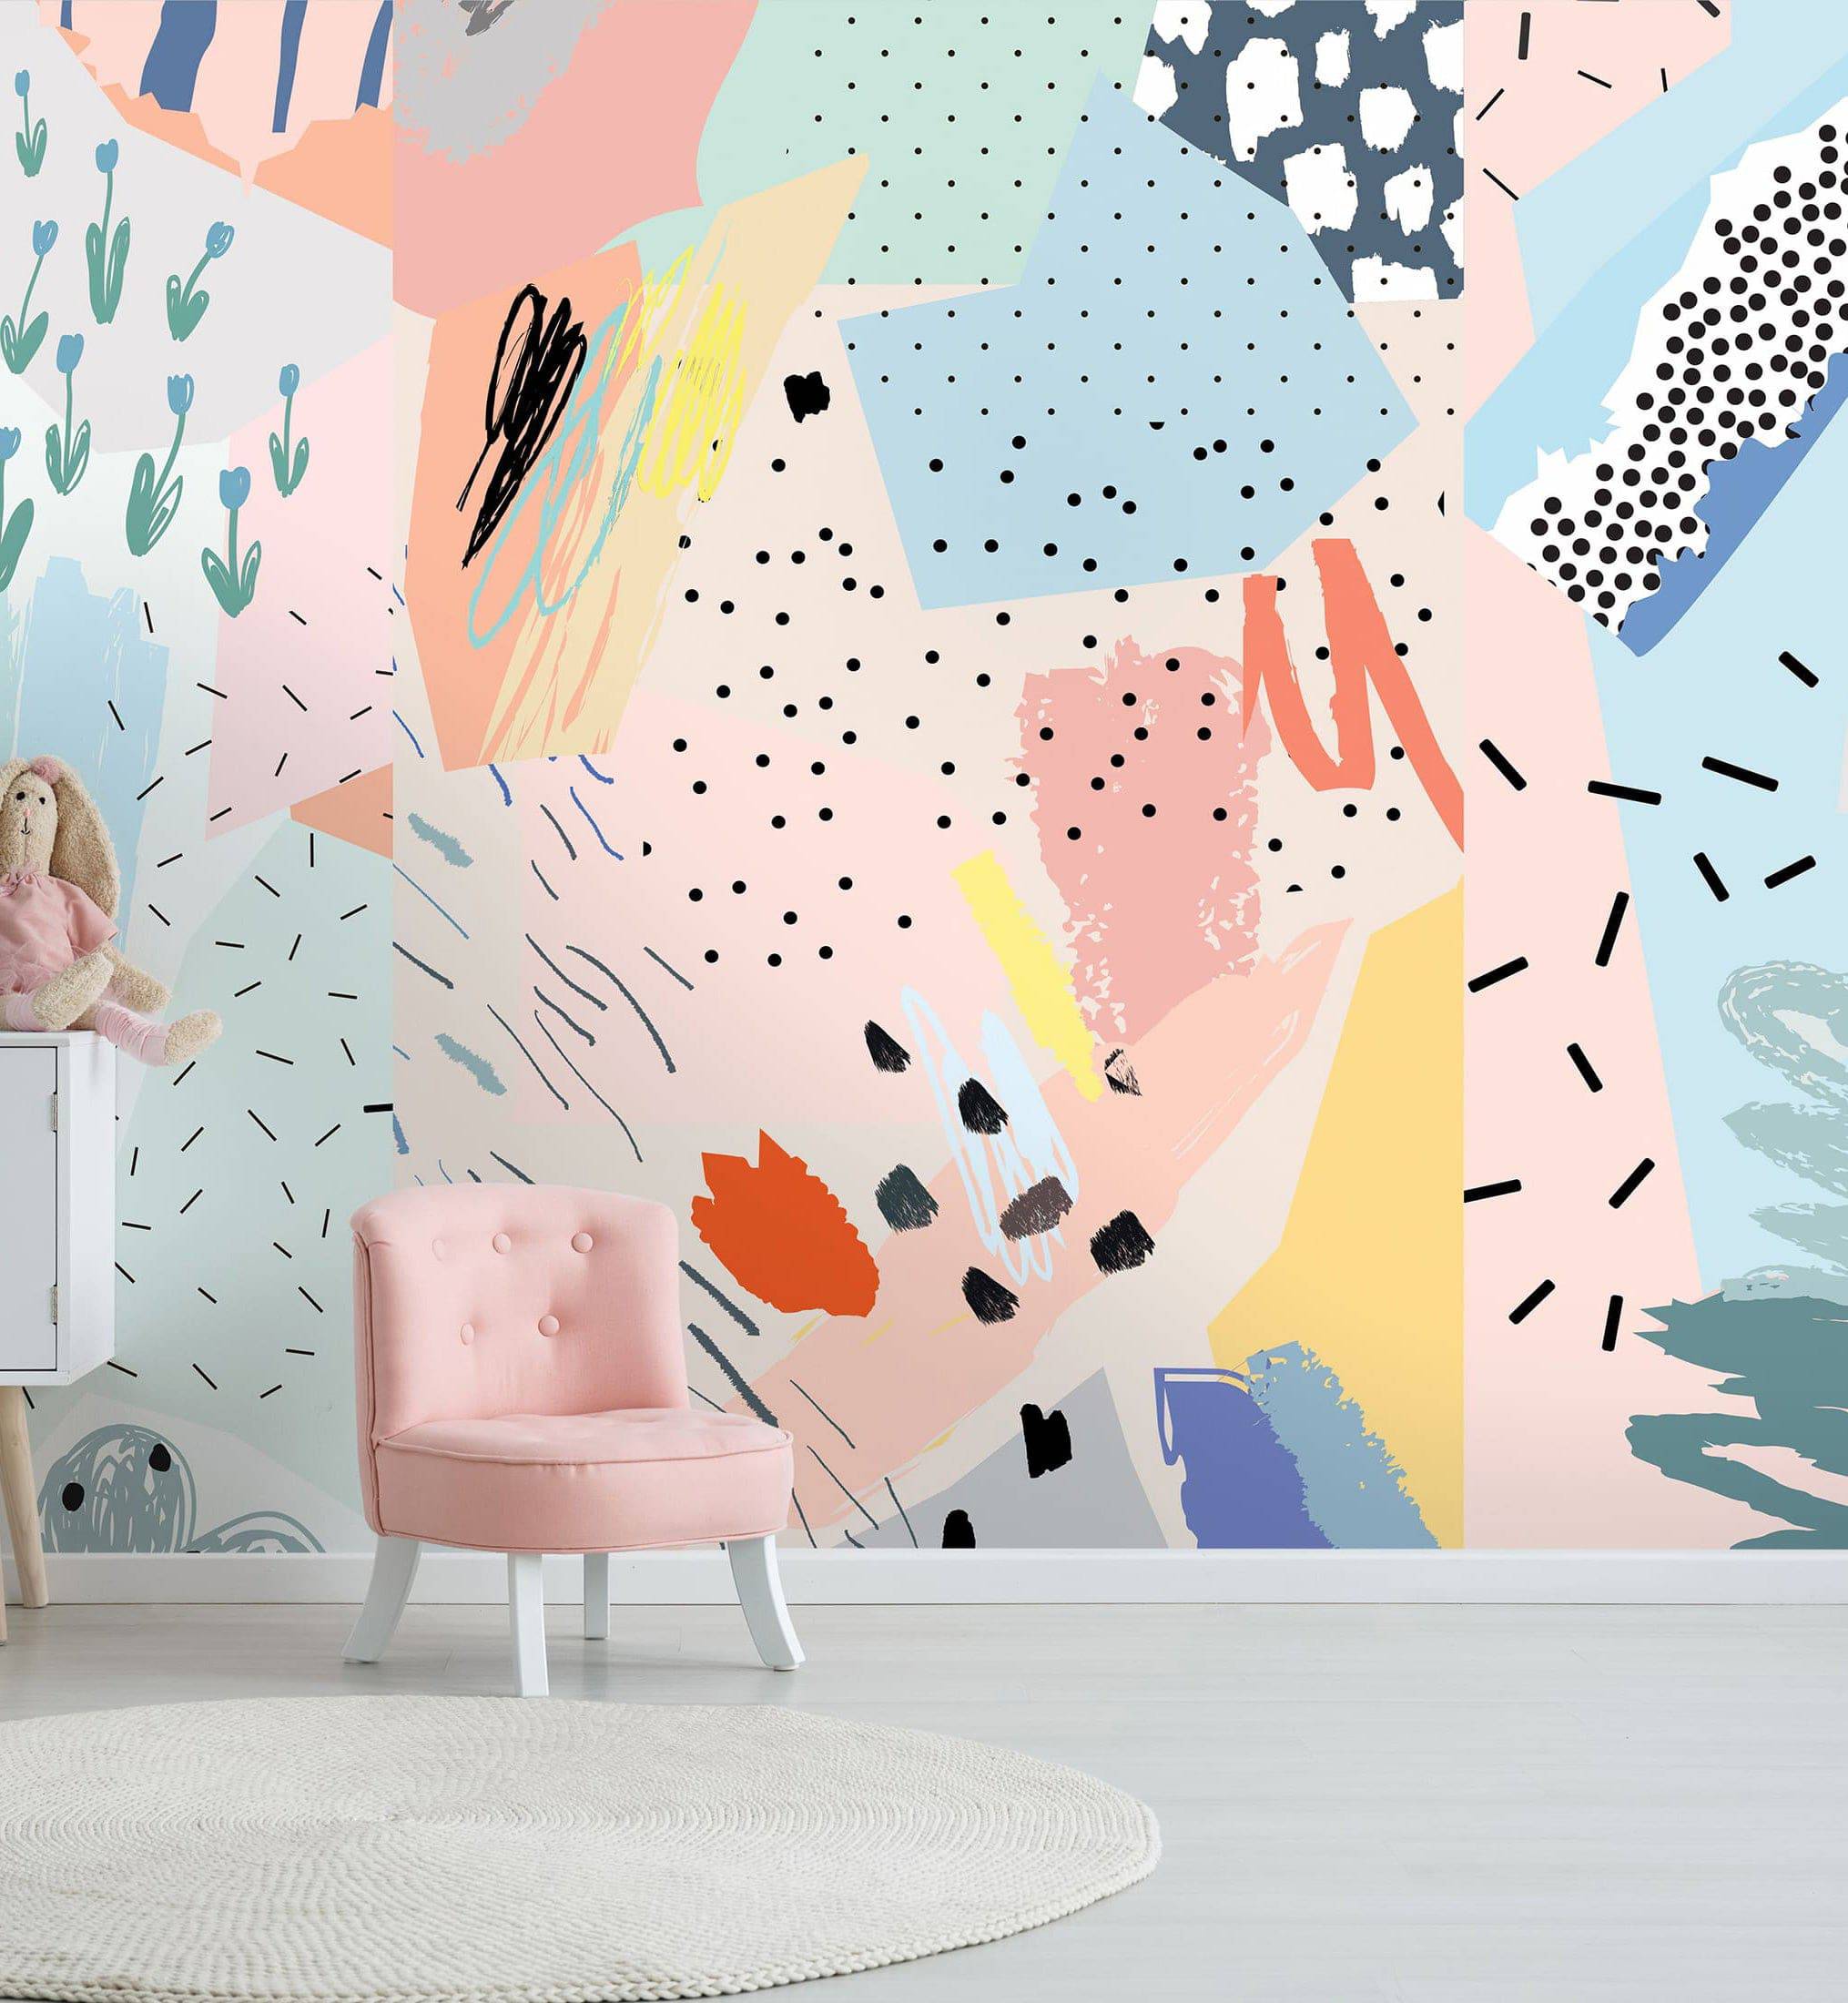 Colorful Abstract Shapes Art Wall Mural